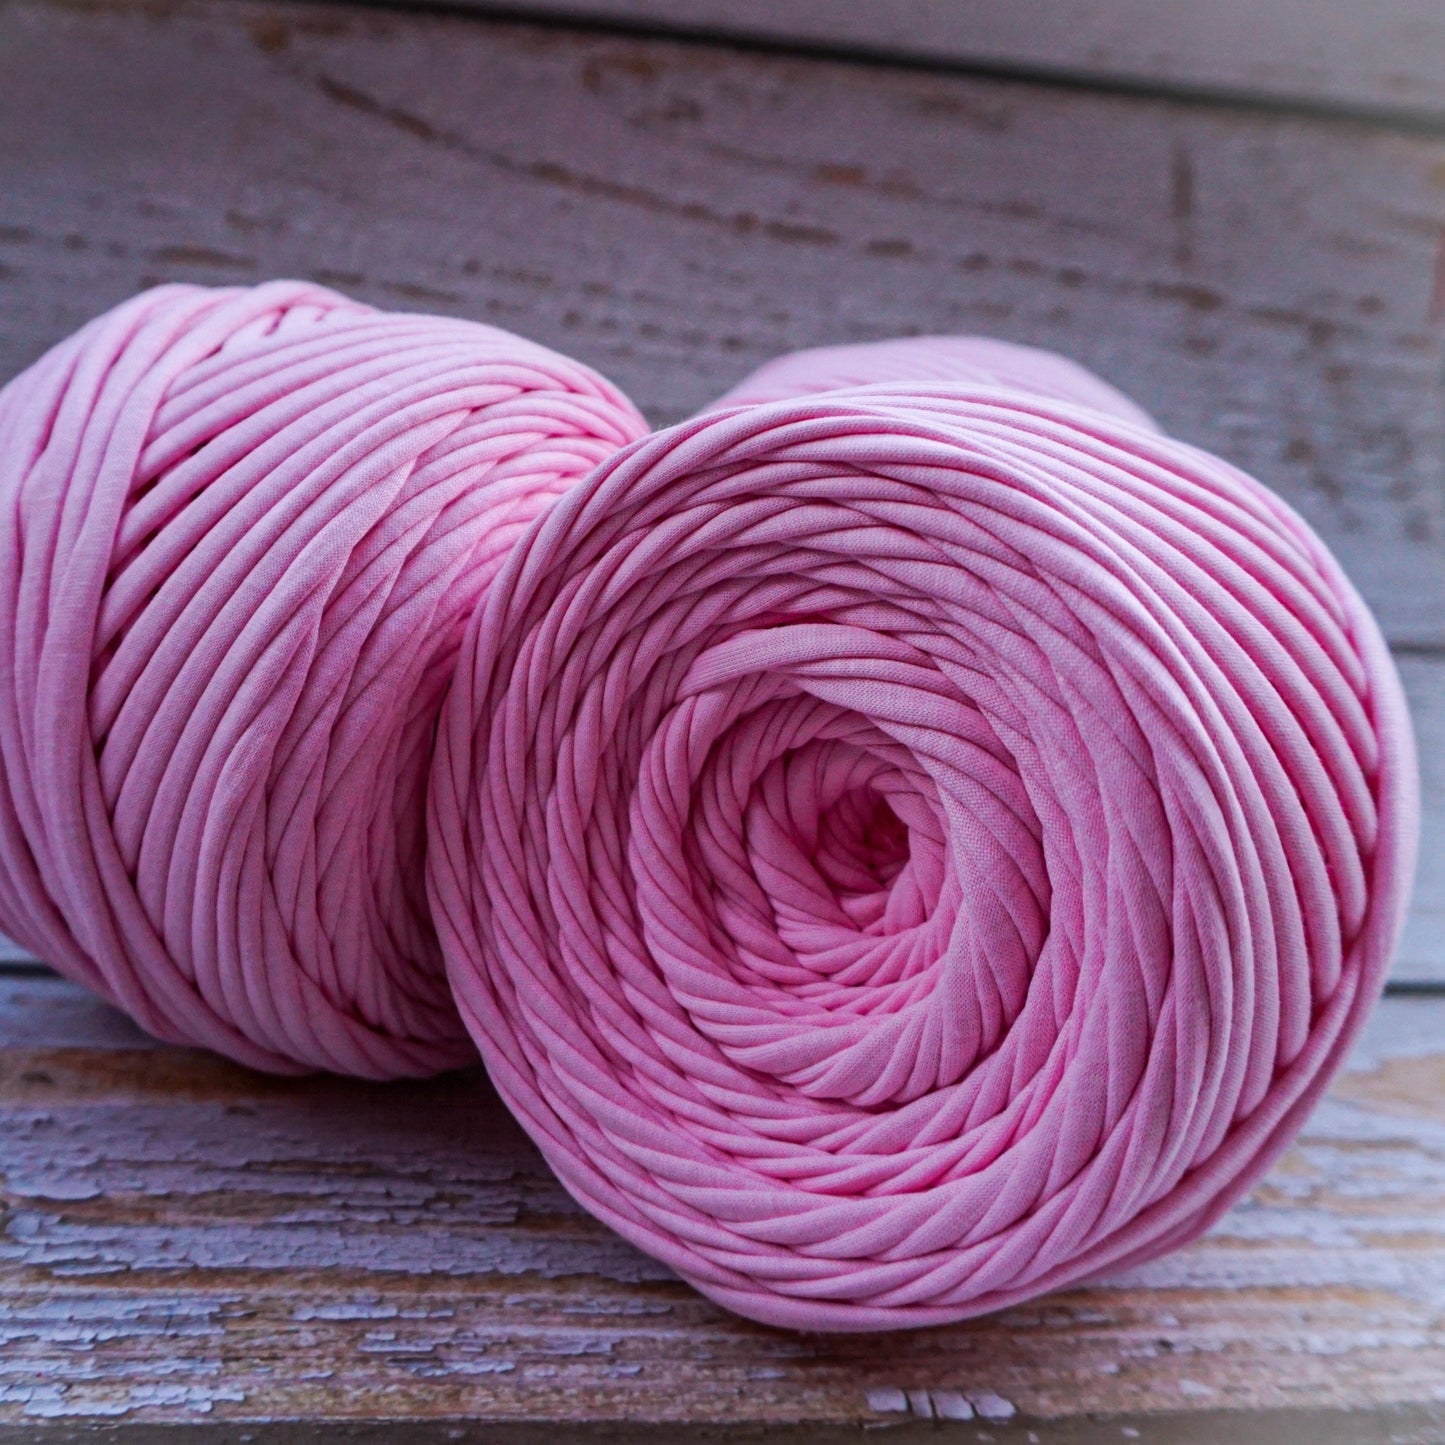 T-shirt yarn for crocheting baskets, bags, rugs and home decor. Pink